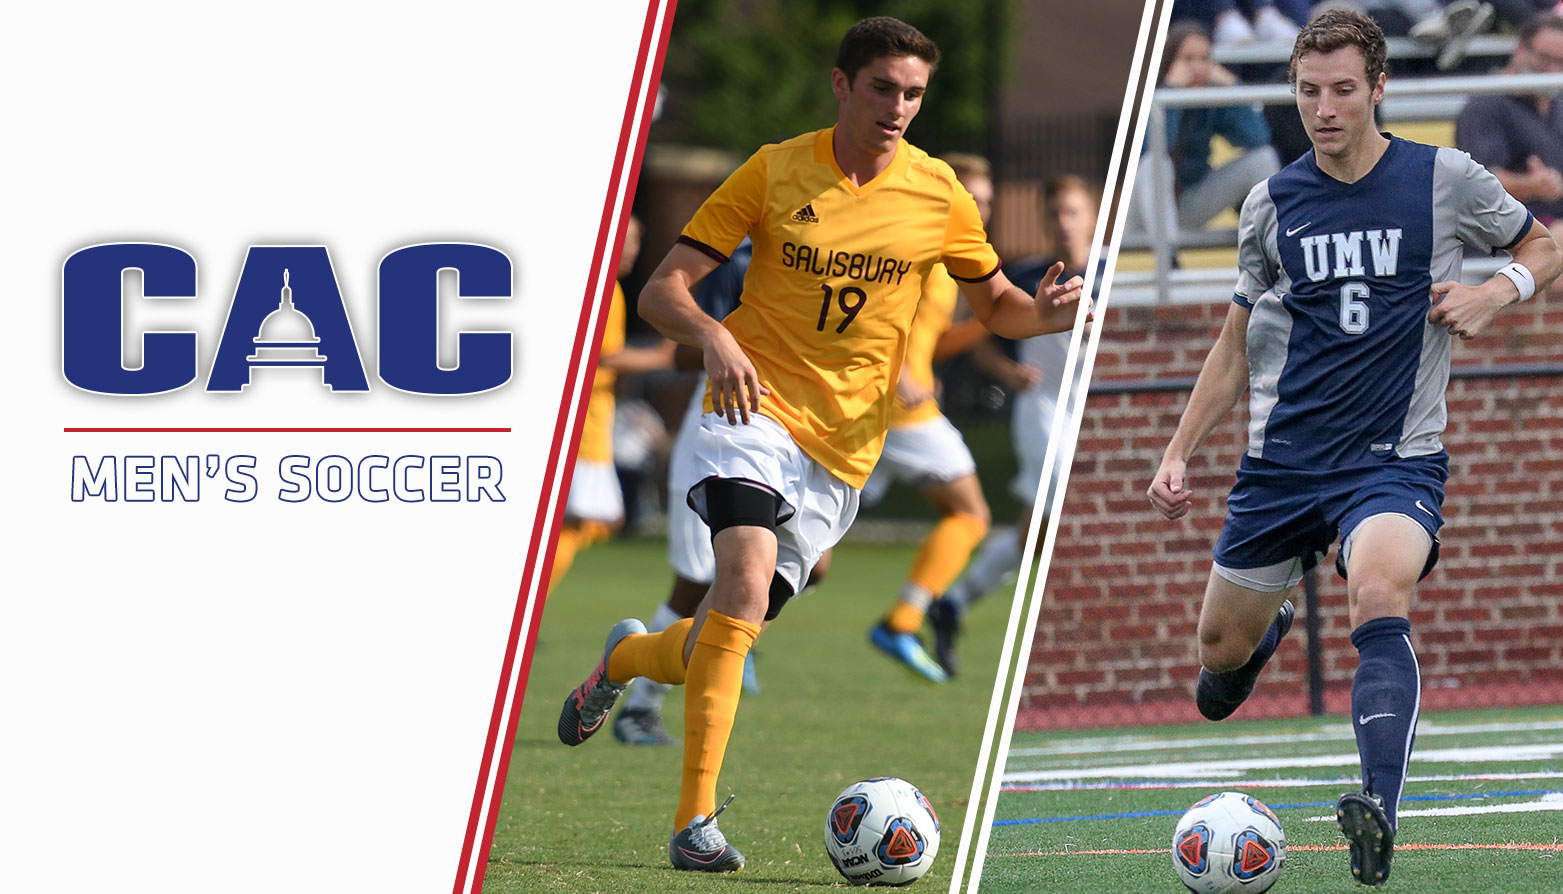 Salisbury's Spadin, Mary Washington's Ahrens Collect CAC Men's Soccer Player of the Week Honors